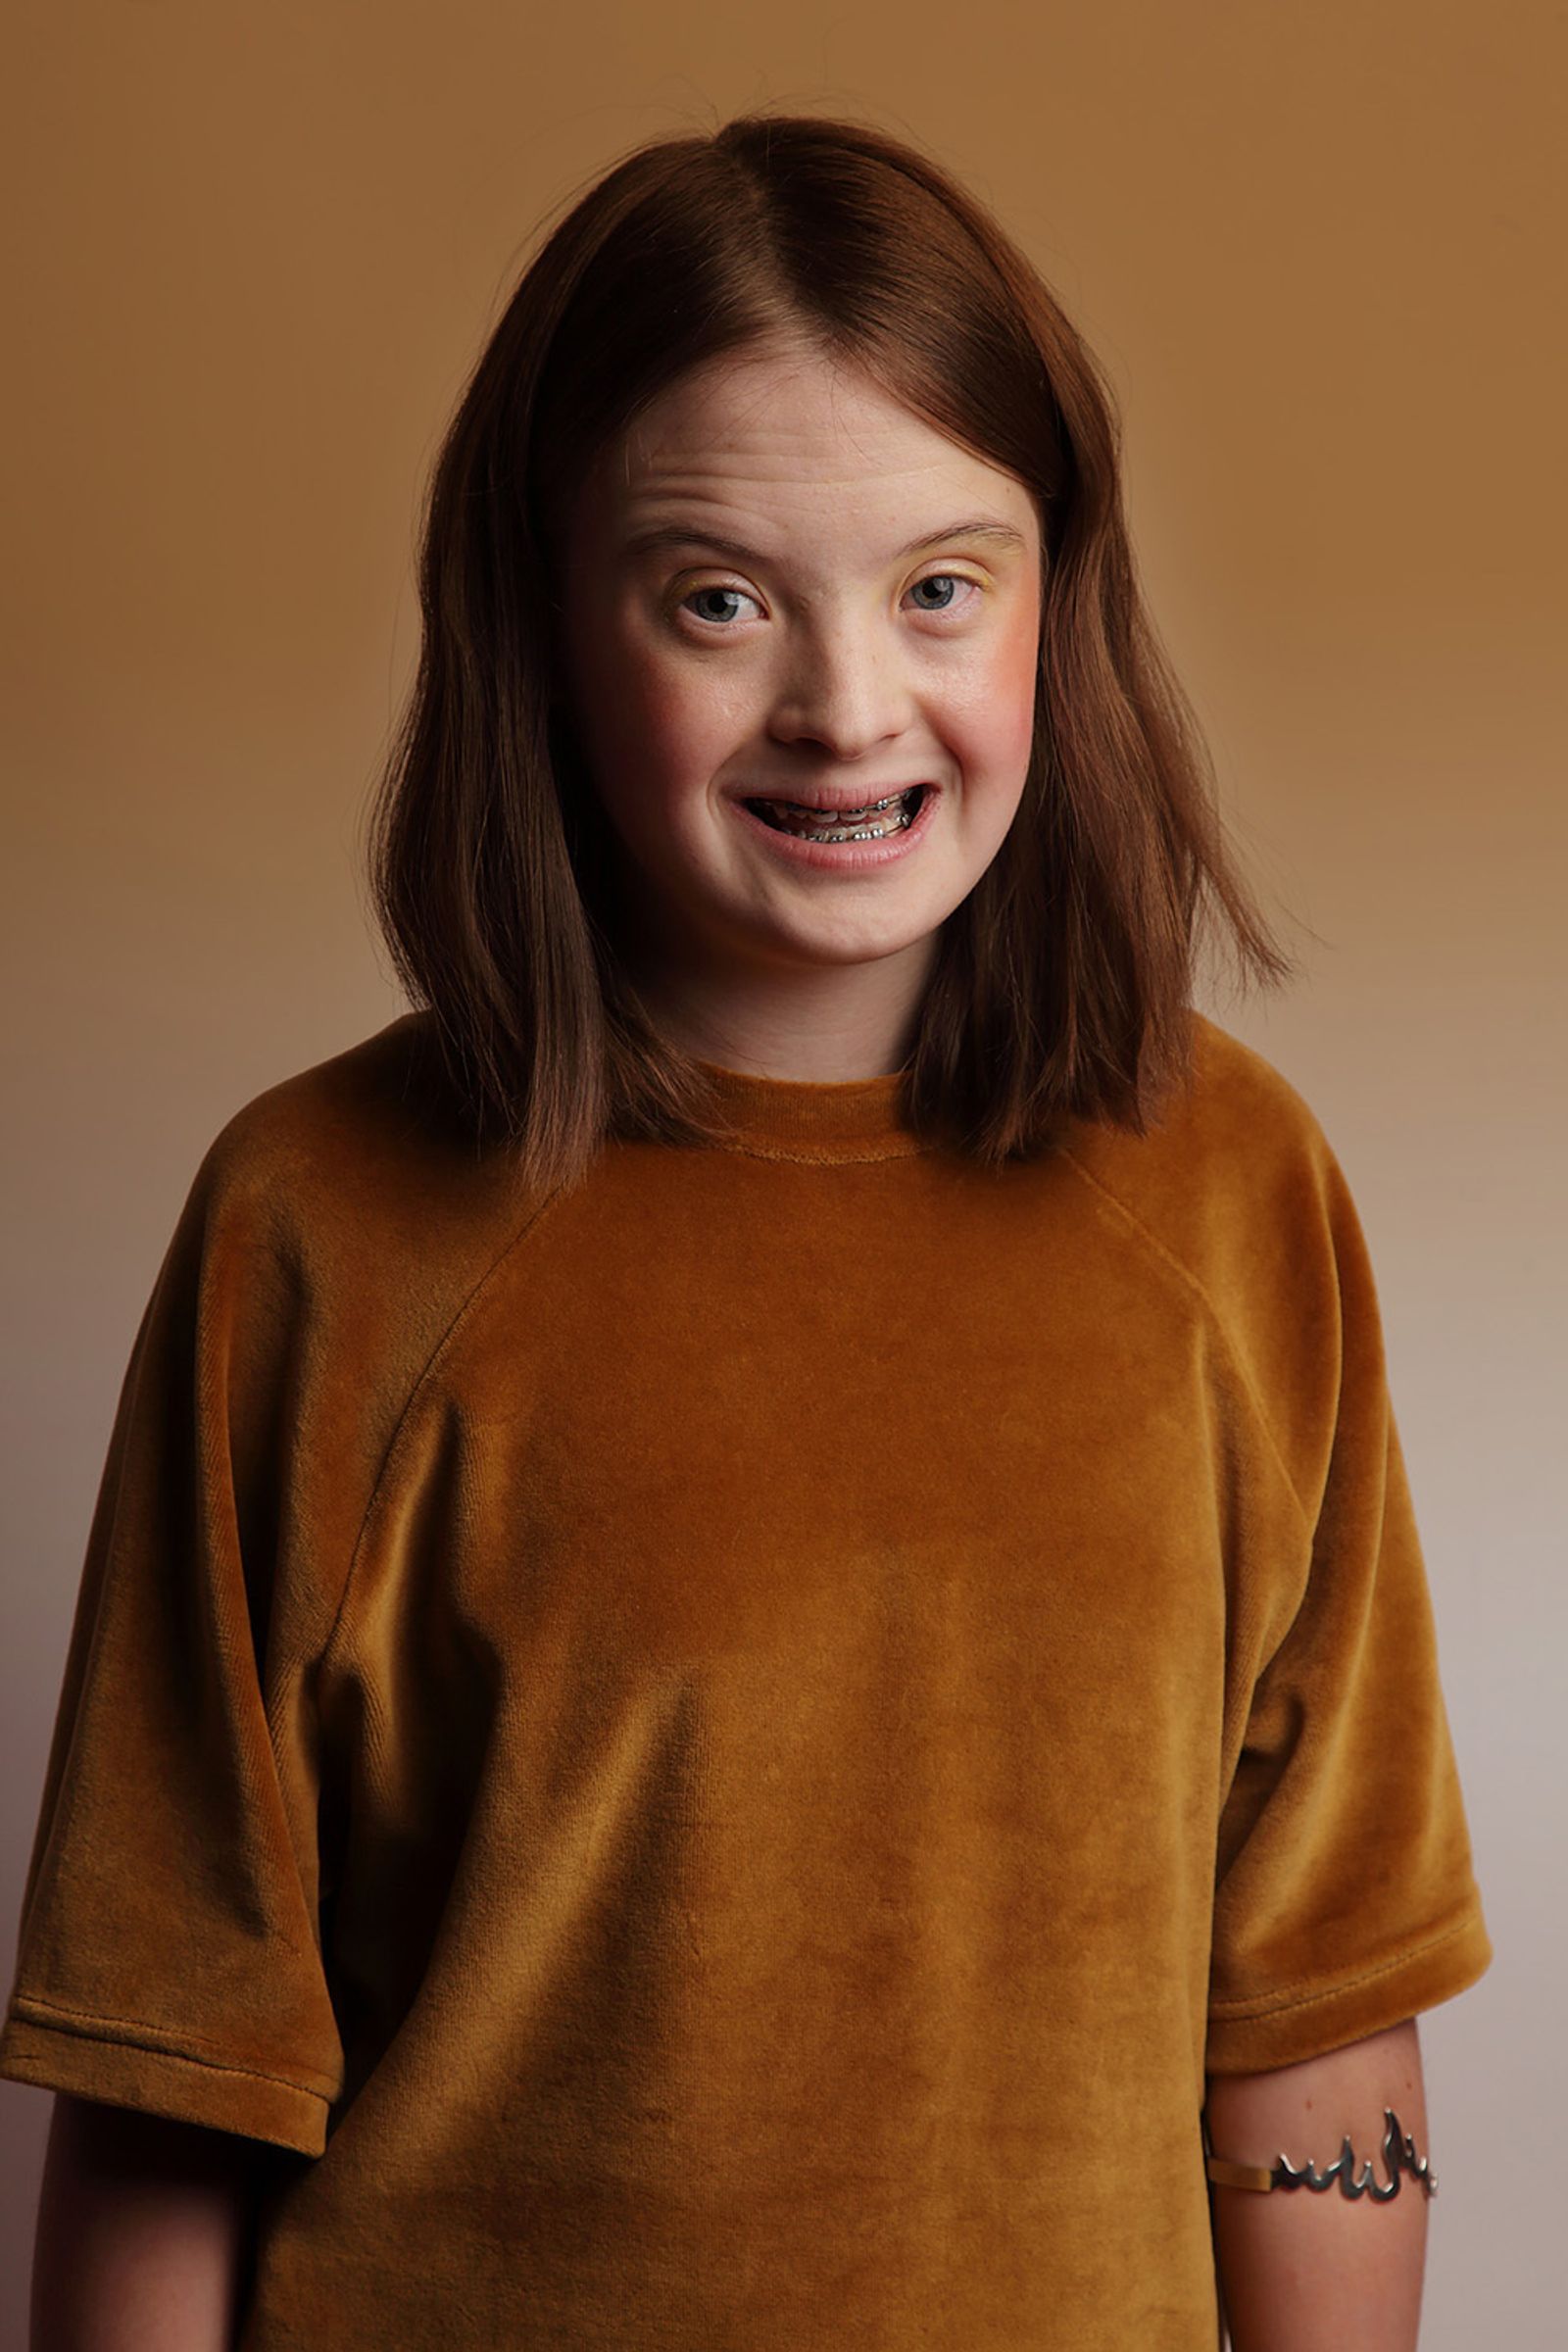 The Meaning of Beauty Revealed by Portraying Life with Down Syndrome